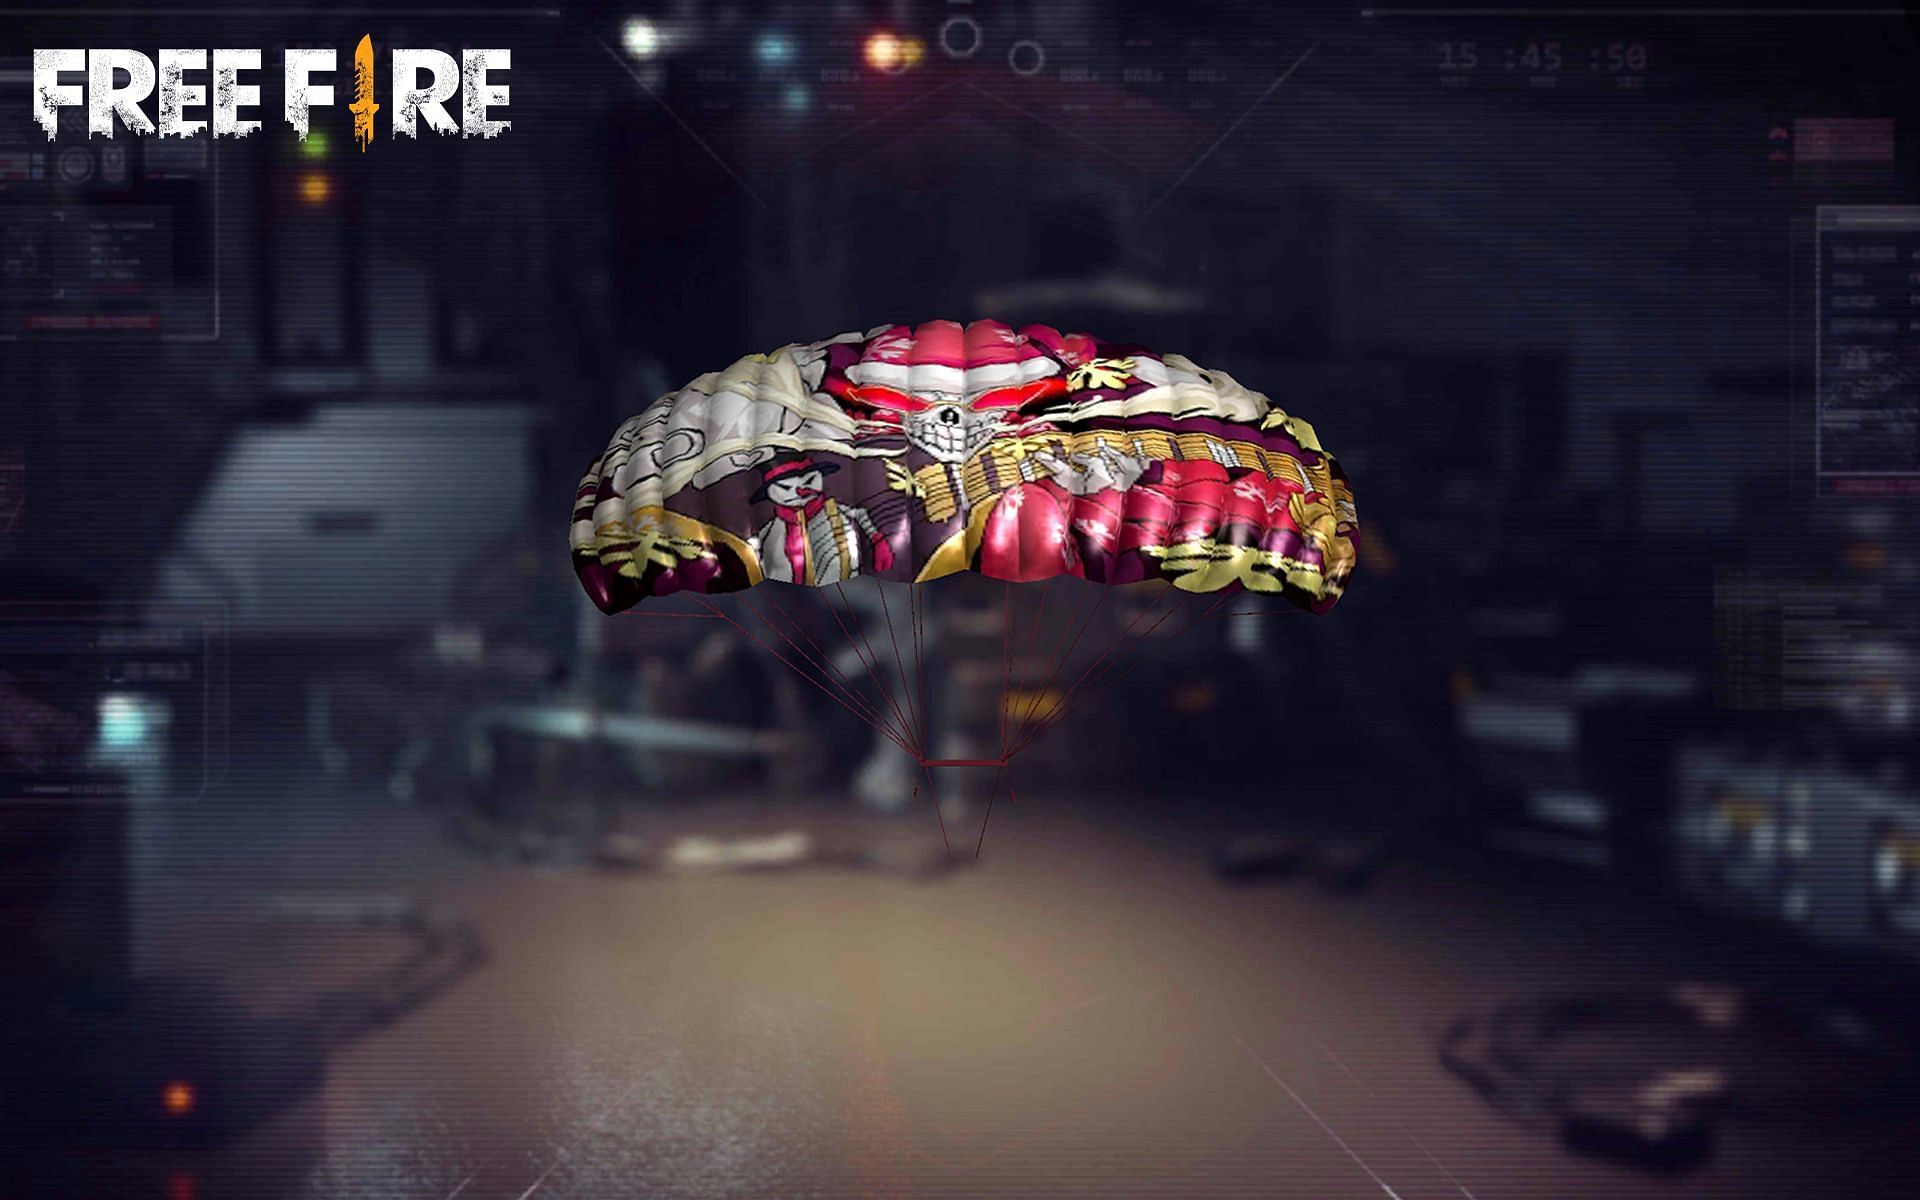 The new parachute skin in Free Fire (Image via Free Fire)